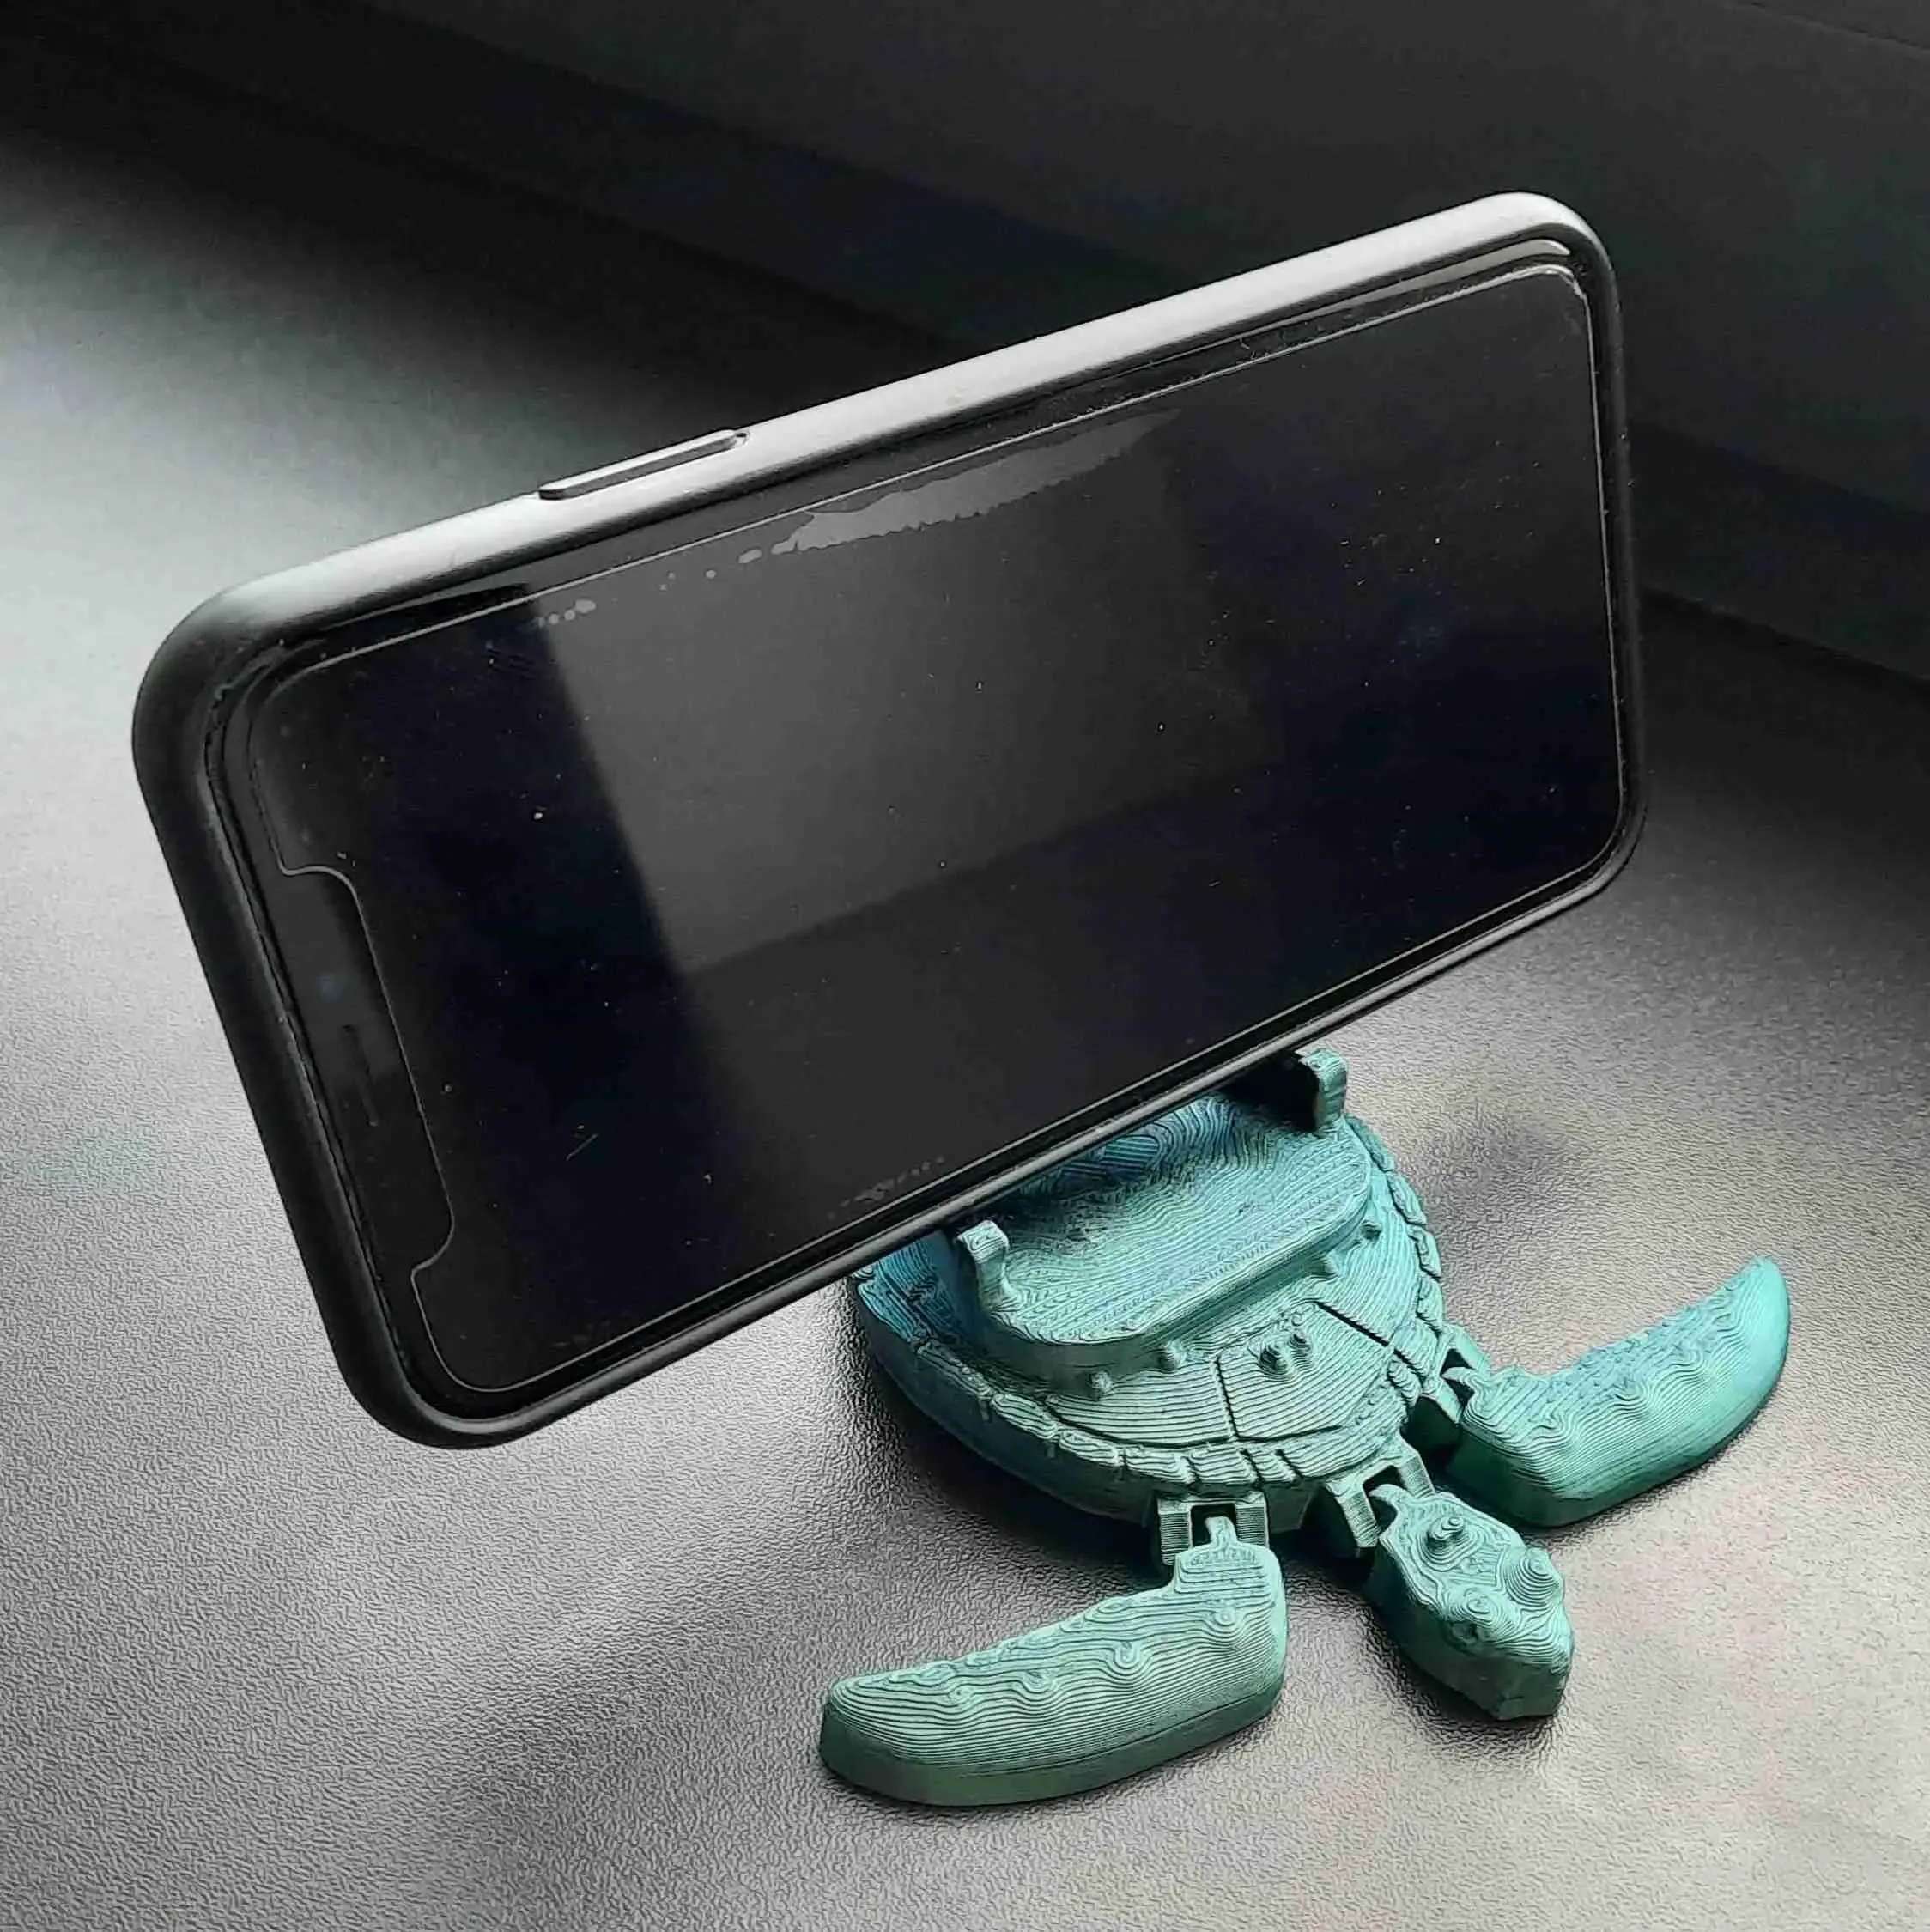 Articulated turtle PHONE holder